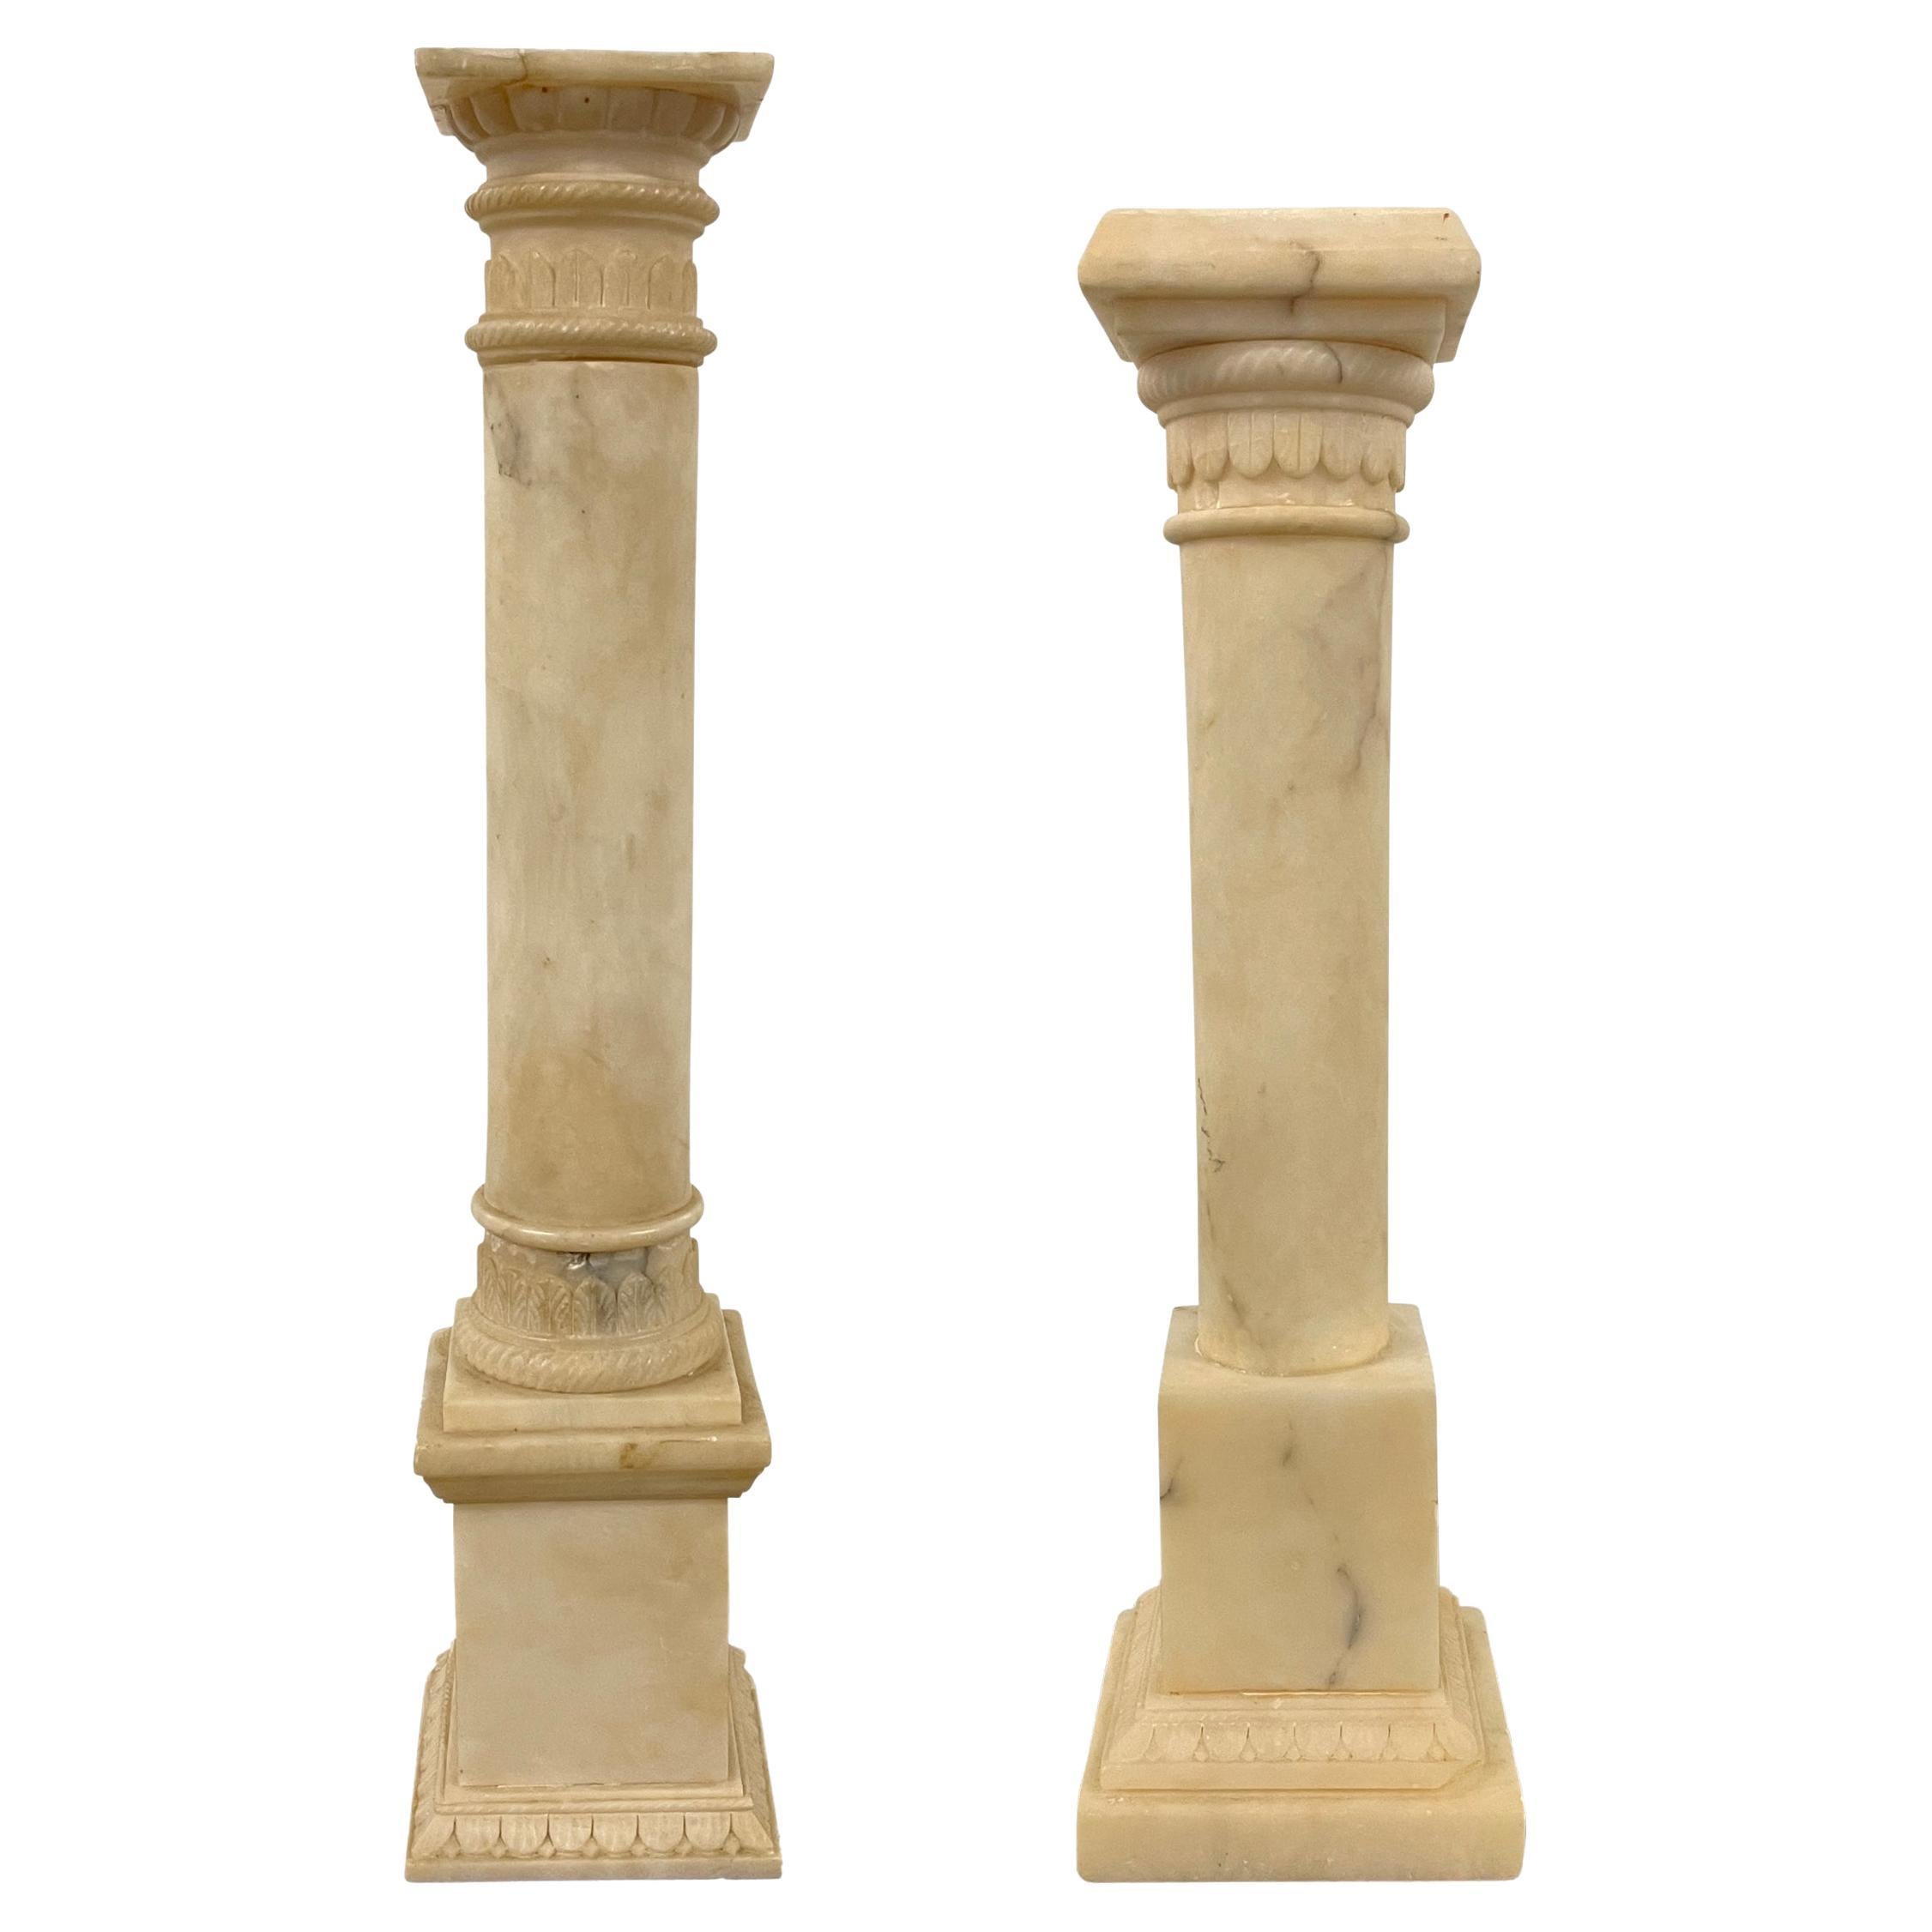 Pair of Early 20th Century Neoclassical Columns